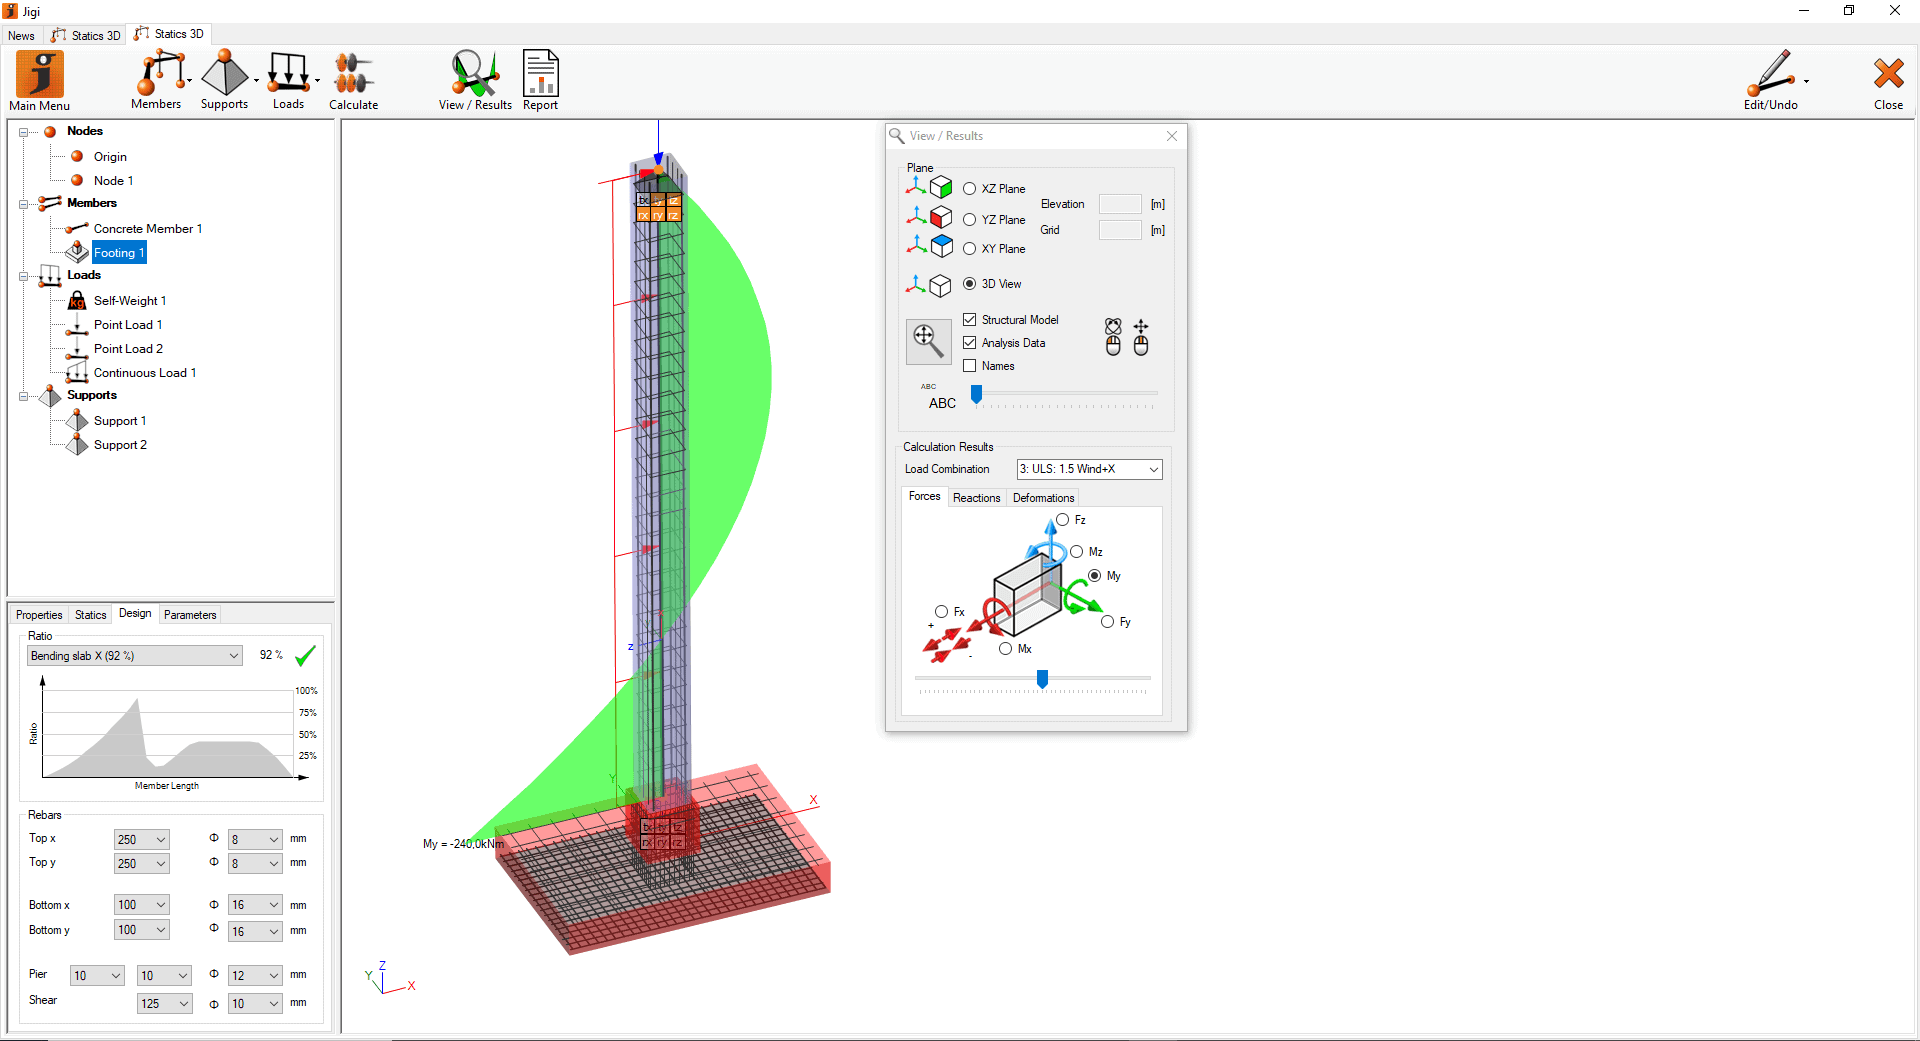 Footing Structural Model